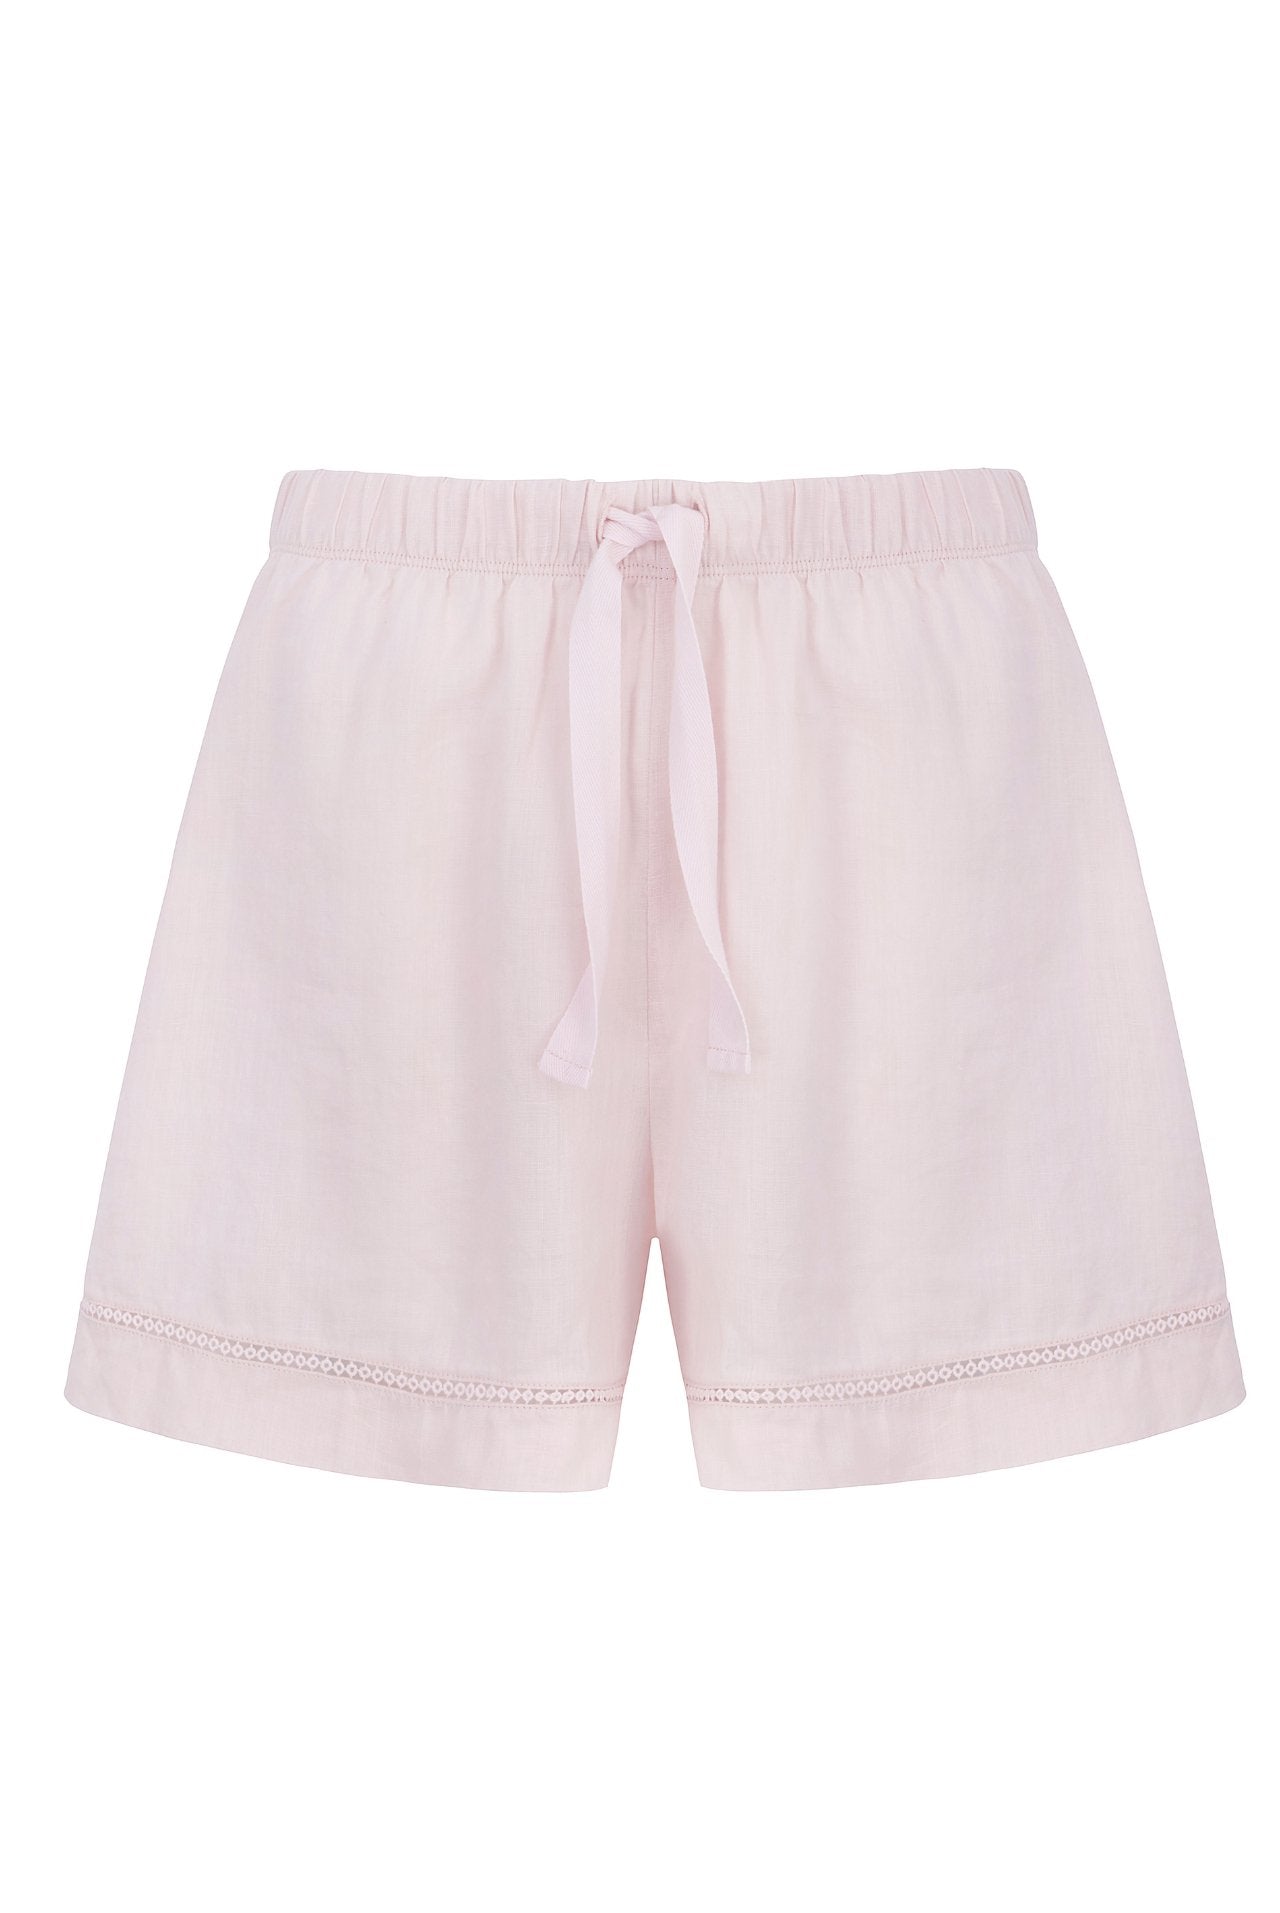 Paignton Sands Short Sleeve Top and Shorts Set in Pink - Heidi Klein - UK Store